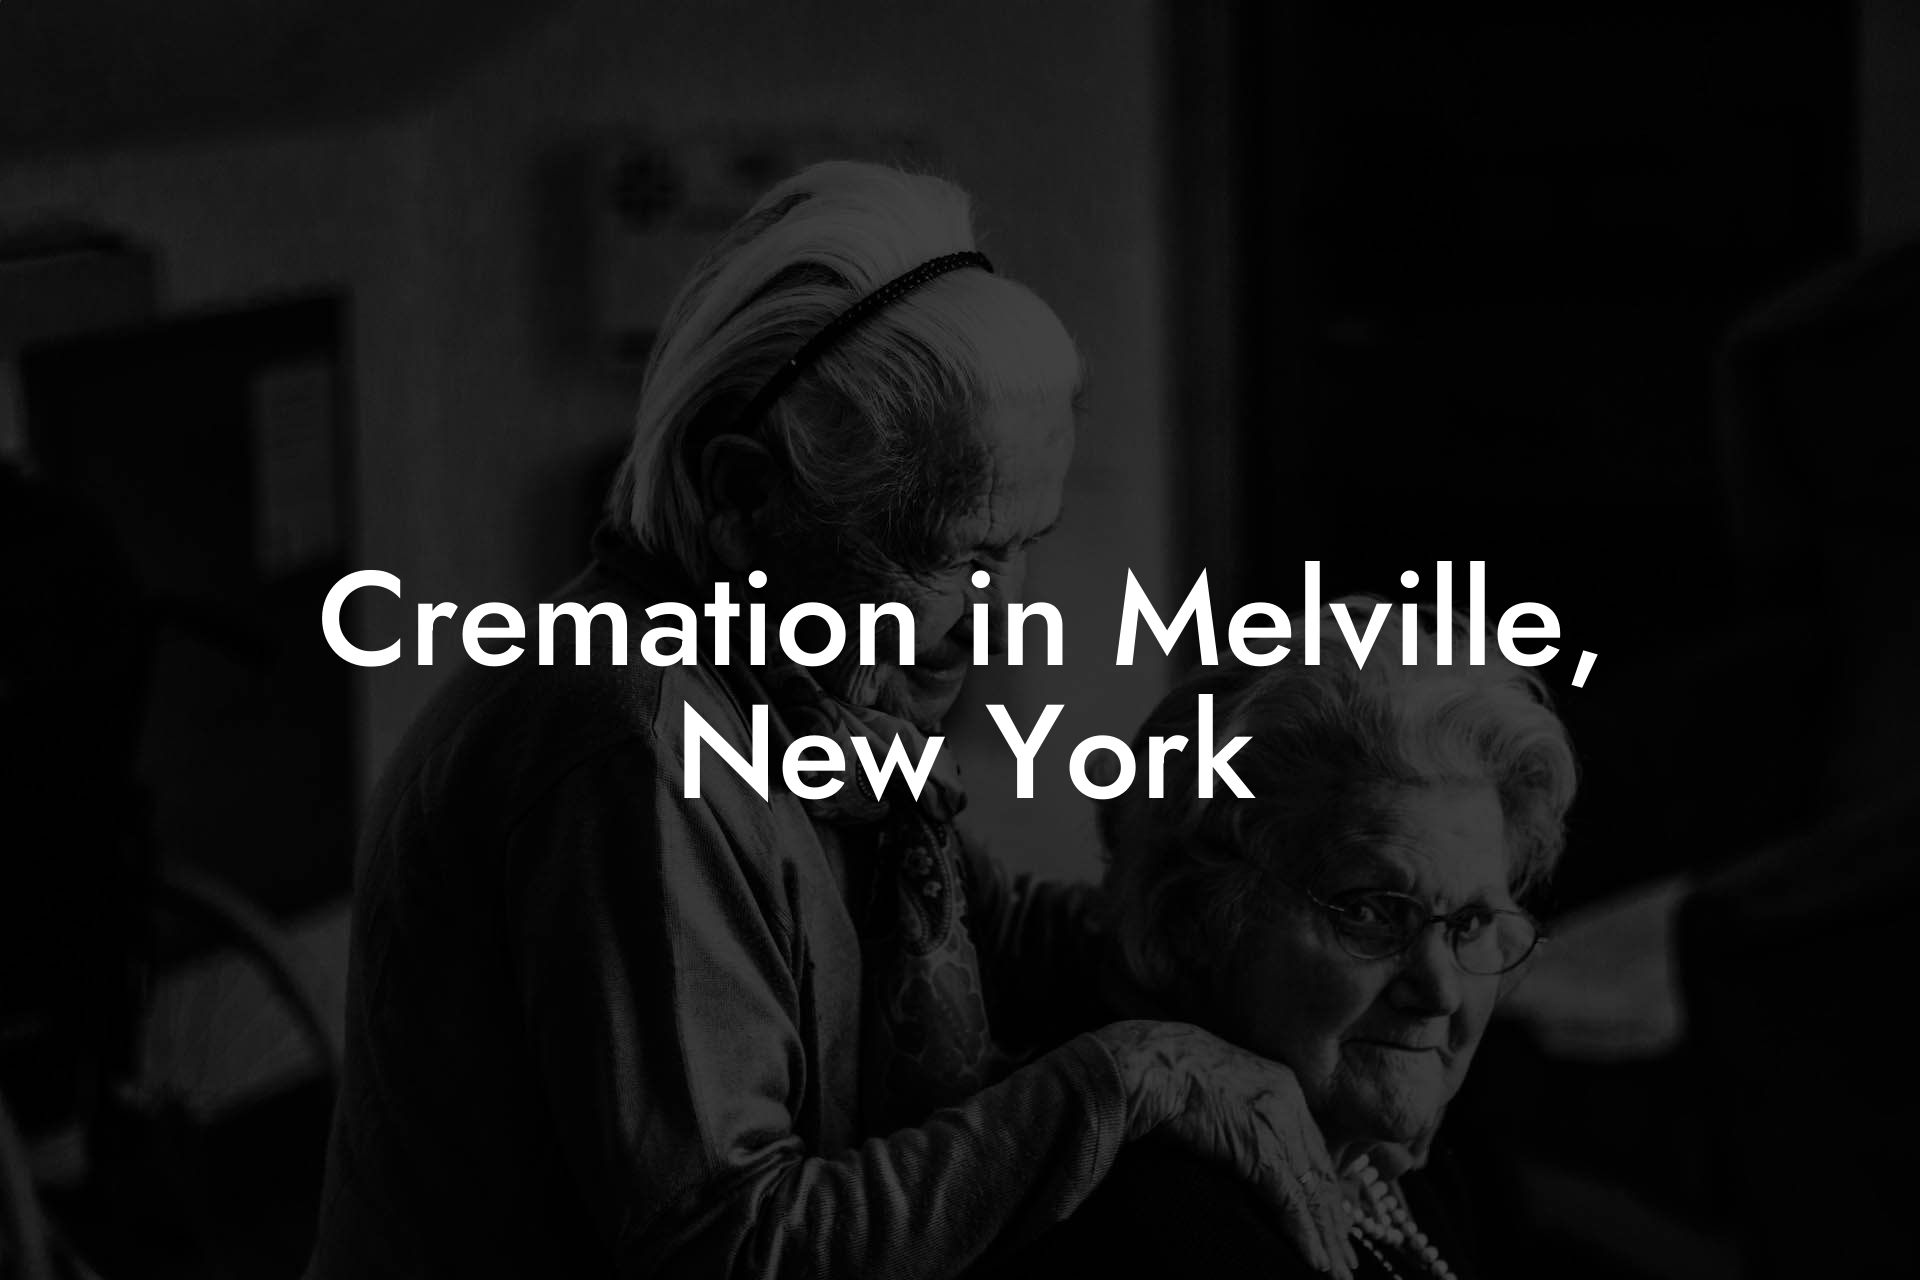 Cremation in Melville, New York